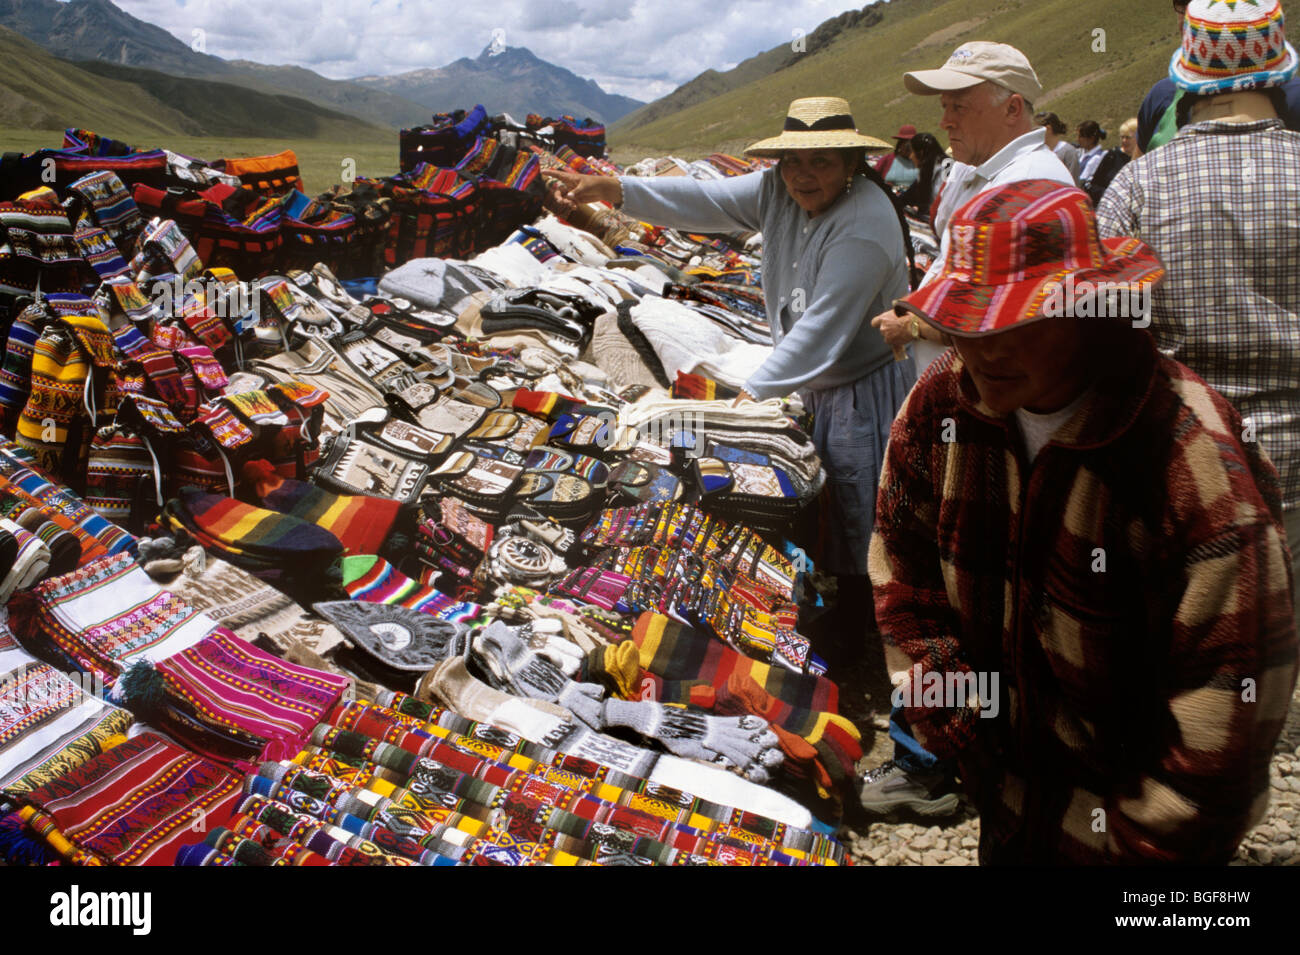 Souvenir gift stall display in the Andes – selling gifts including Peruvian  wool scarves, bags, hats, gloves, to tourists. Peru Stock Photo - Alamy